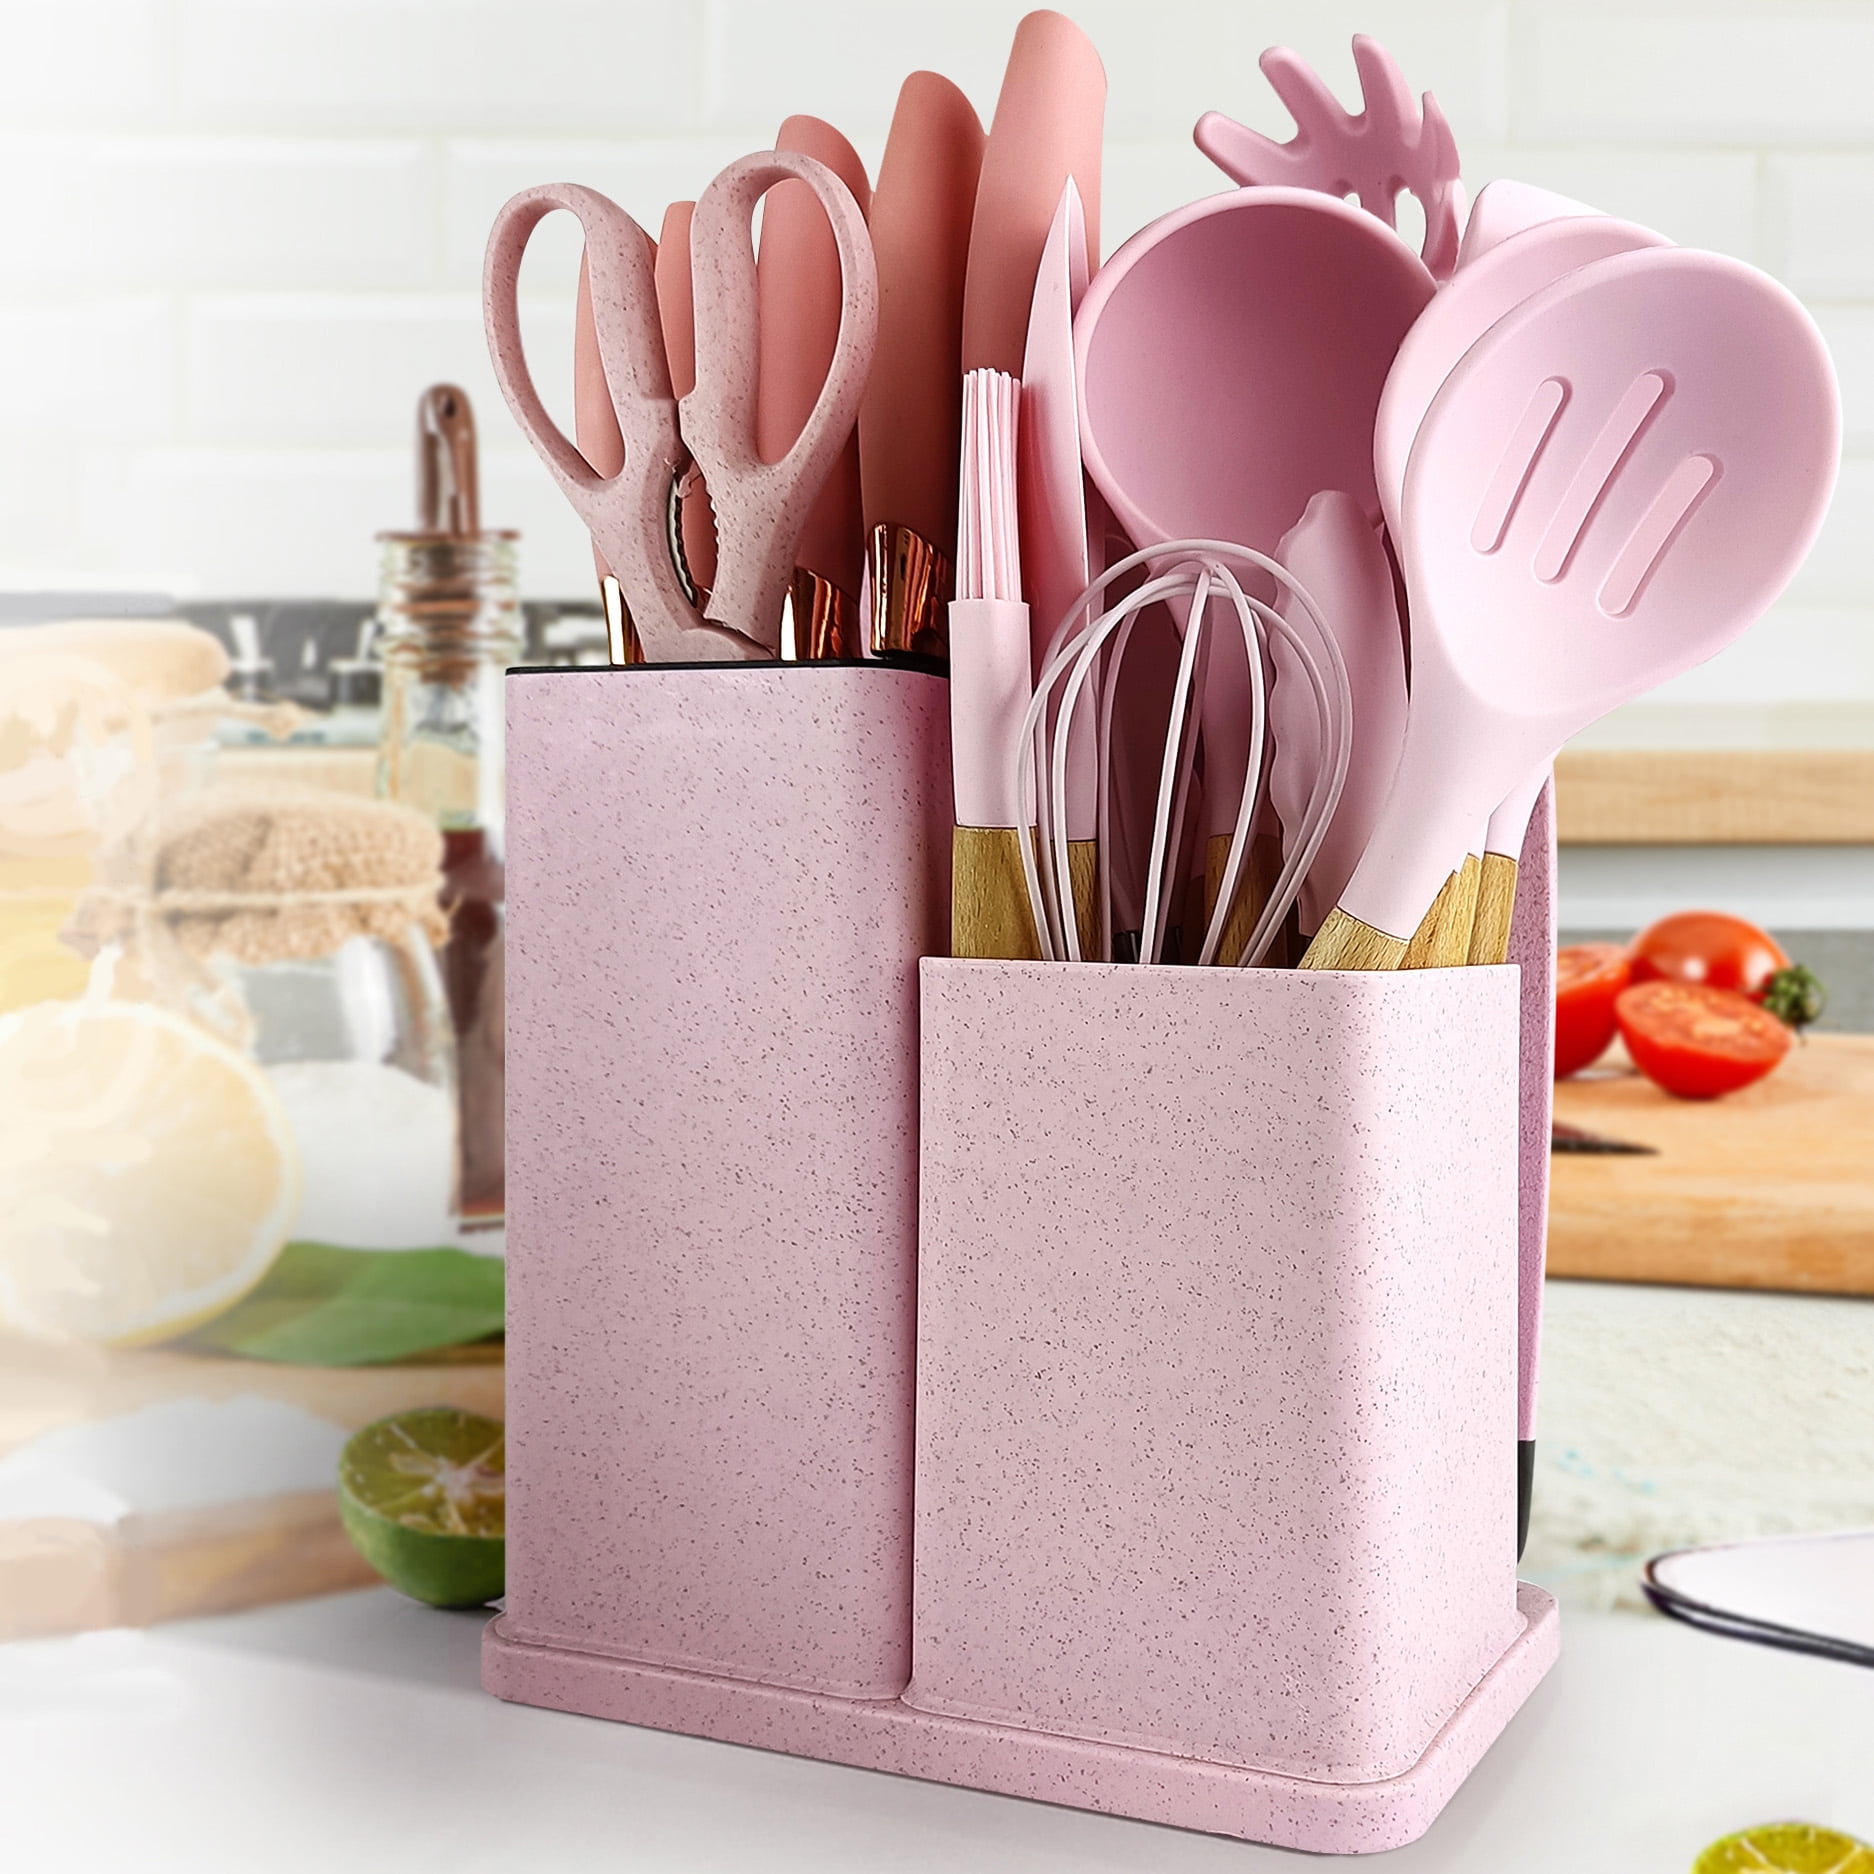 12 PC Pink Silicone Utensil Set With Storage Box – R & B Import